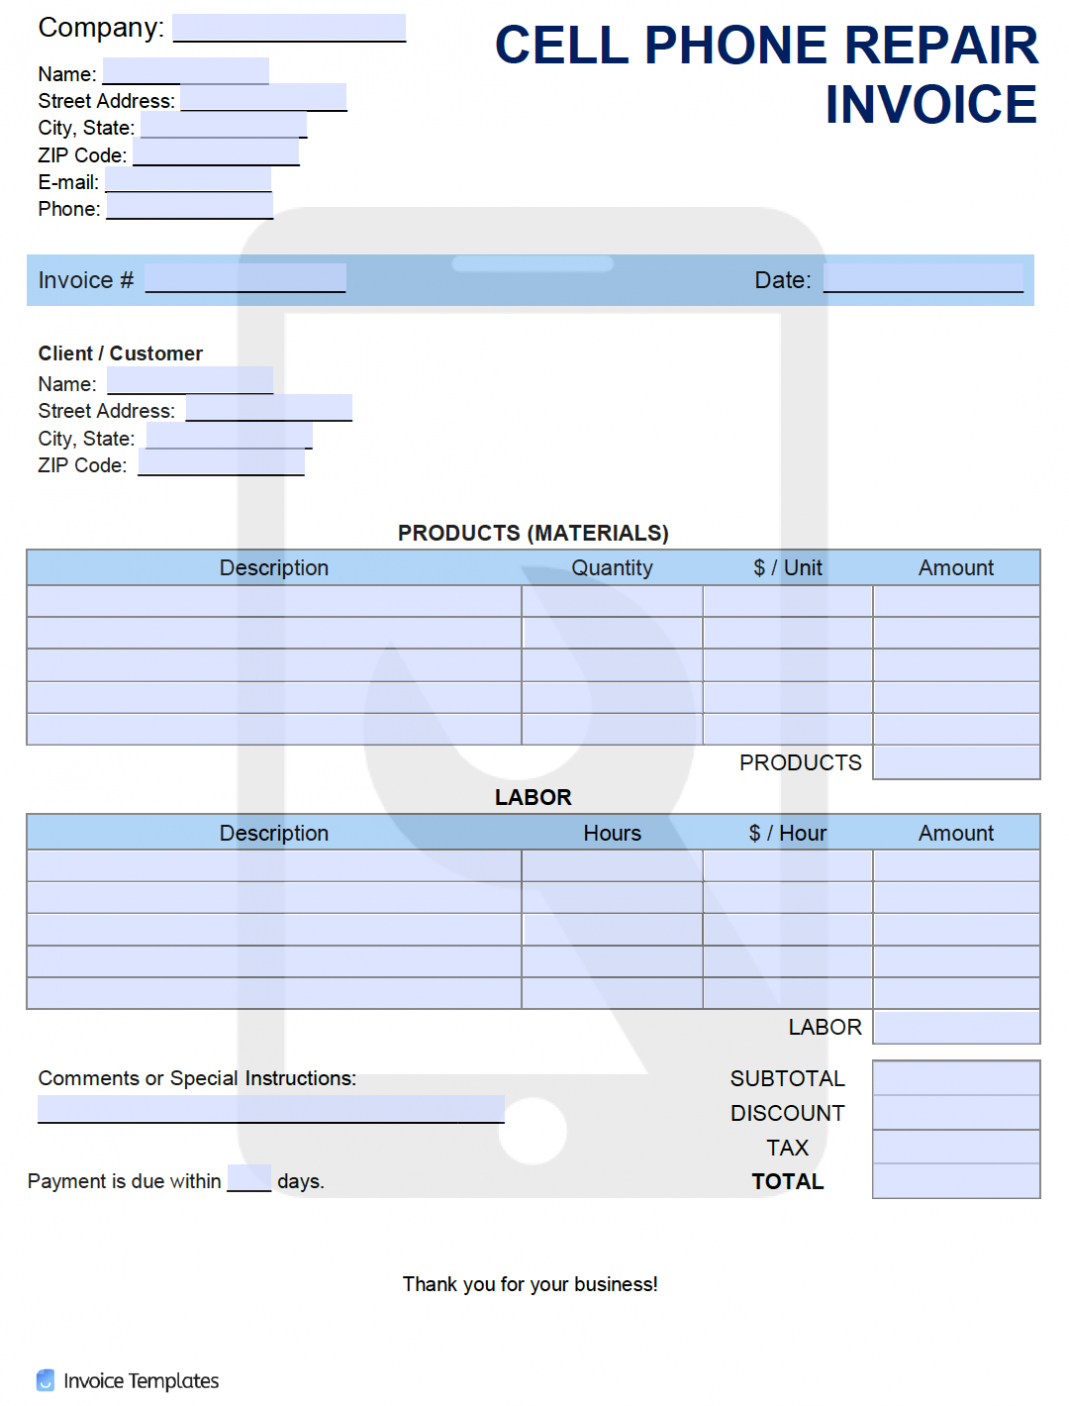 Free Cell Phone Repair Invoice Template | Pdf | Word | Excel throughout Mobile Phone Invoice Template